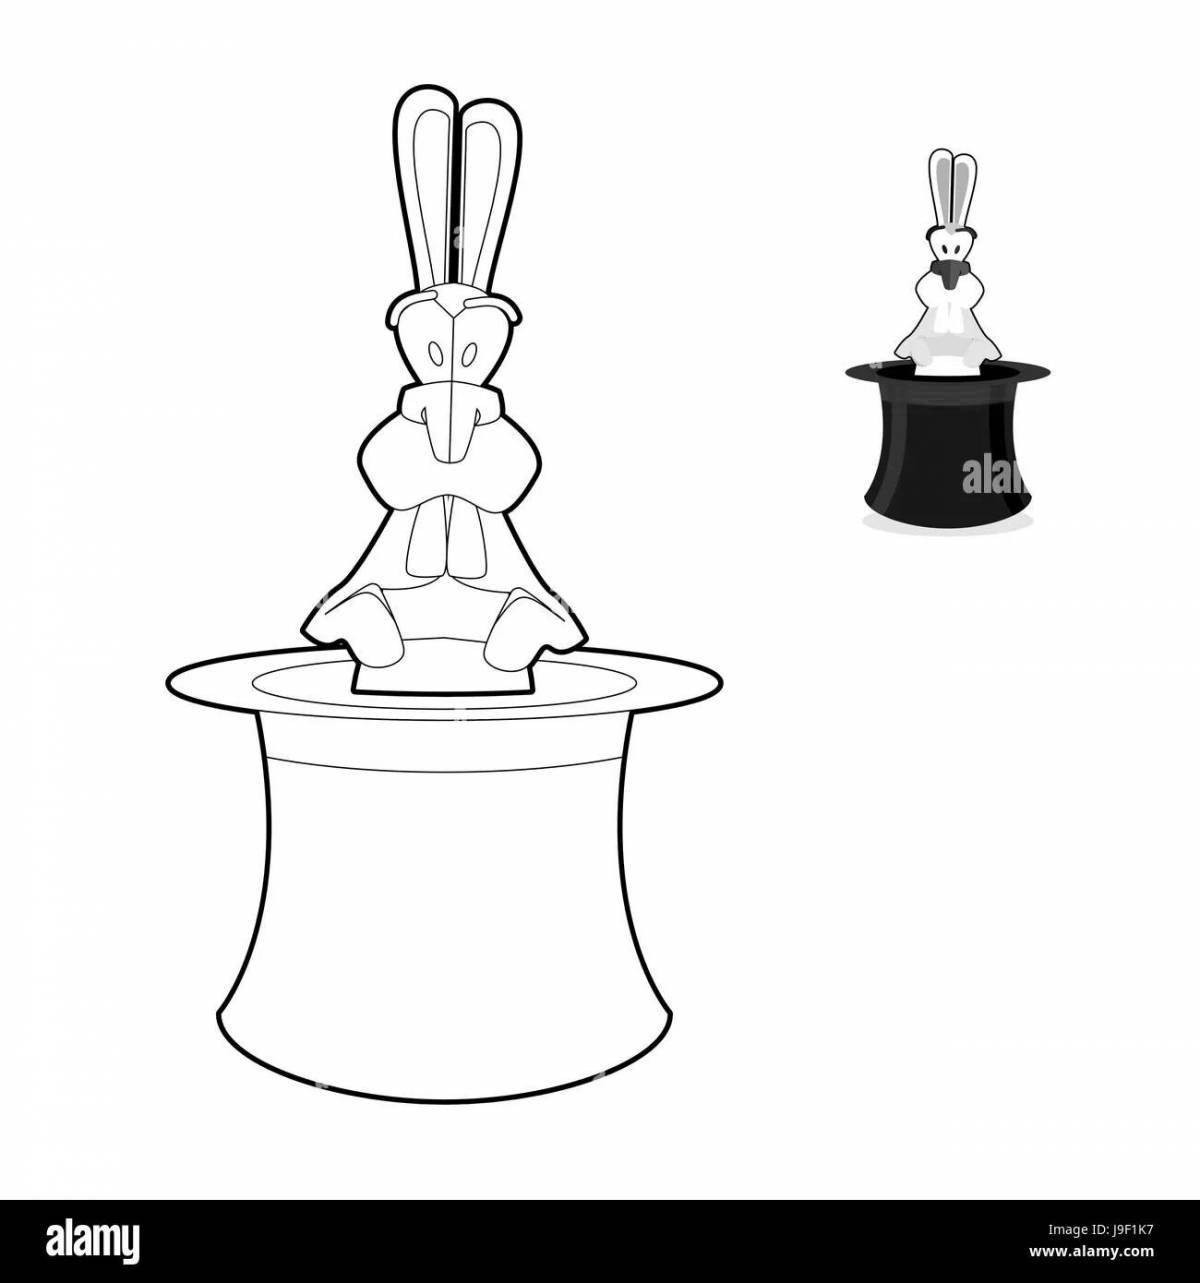 Decorated wizard's hat coloring page